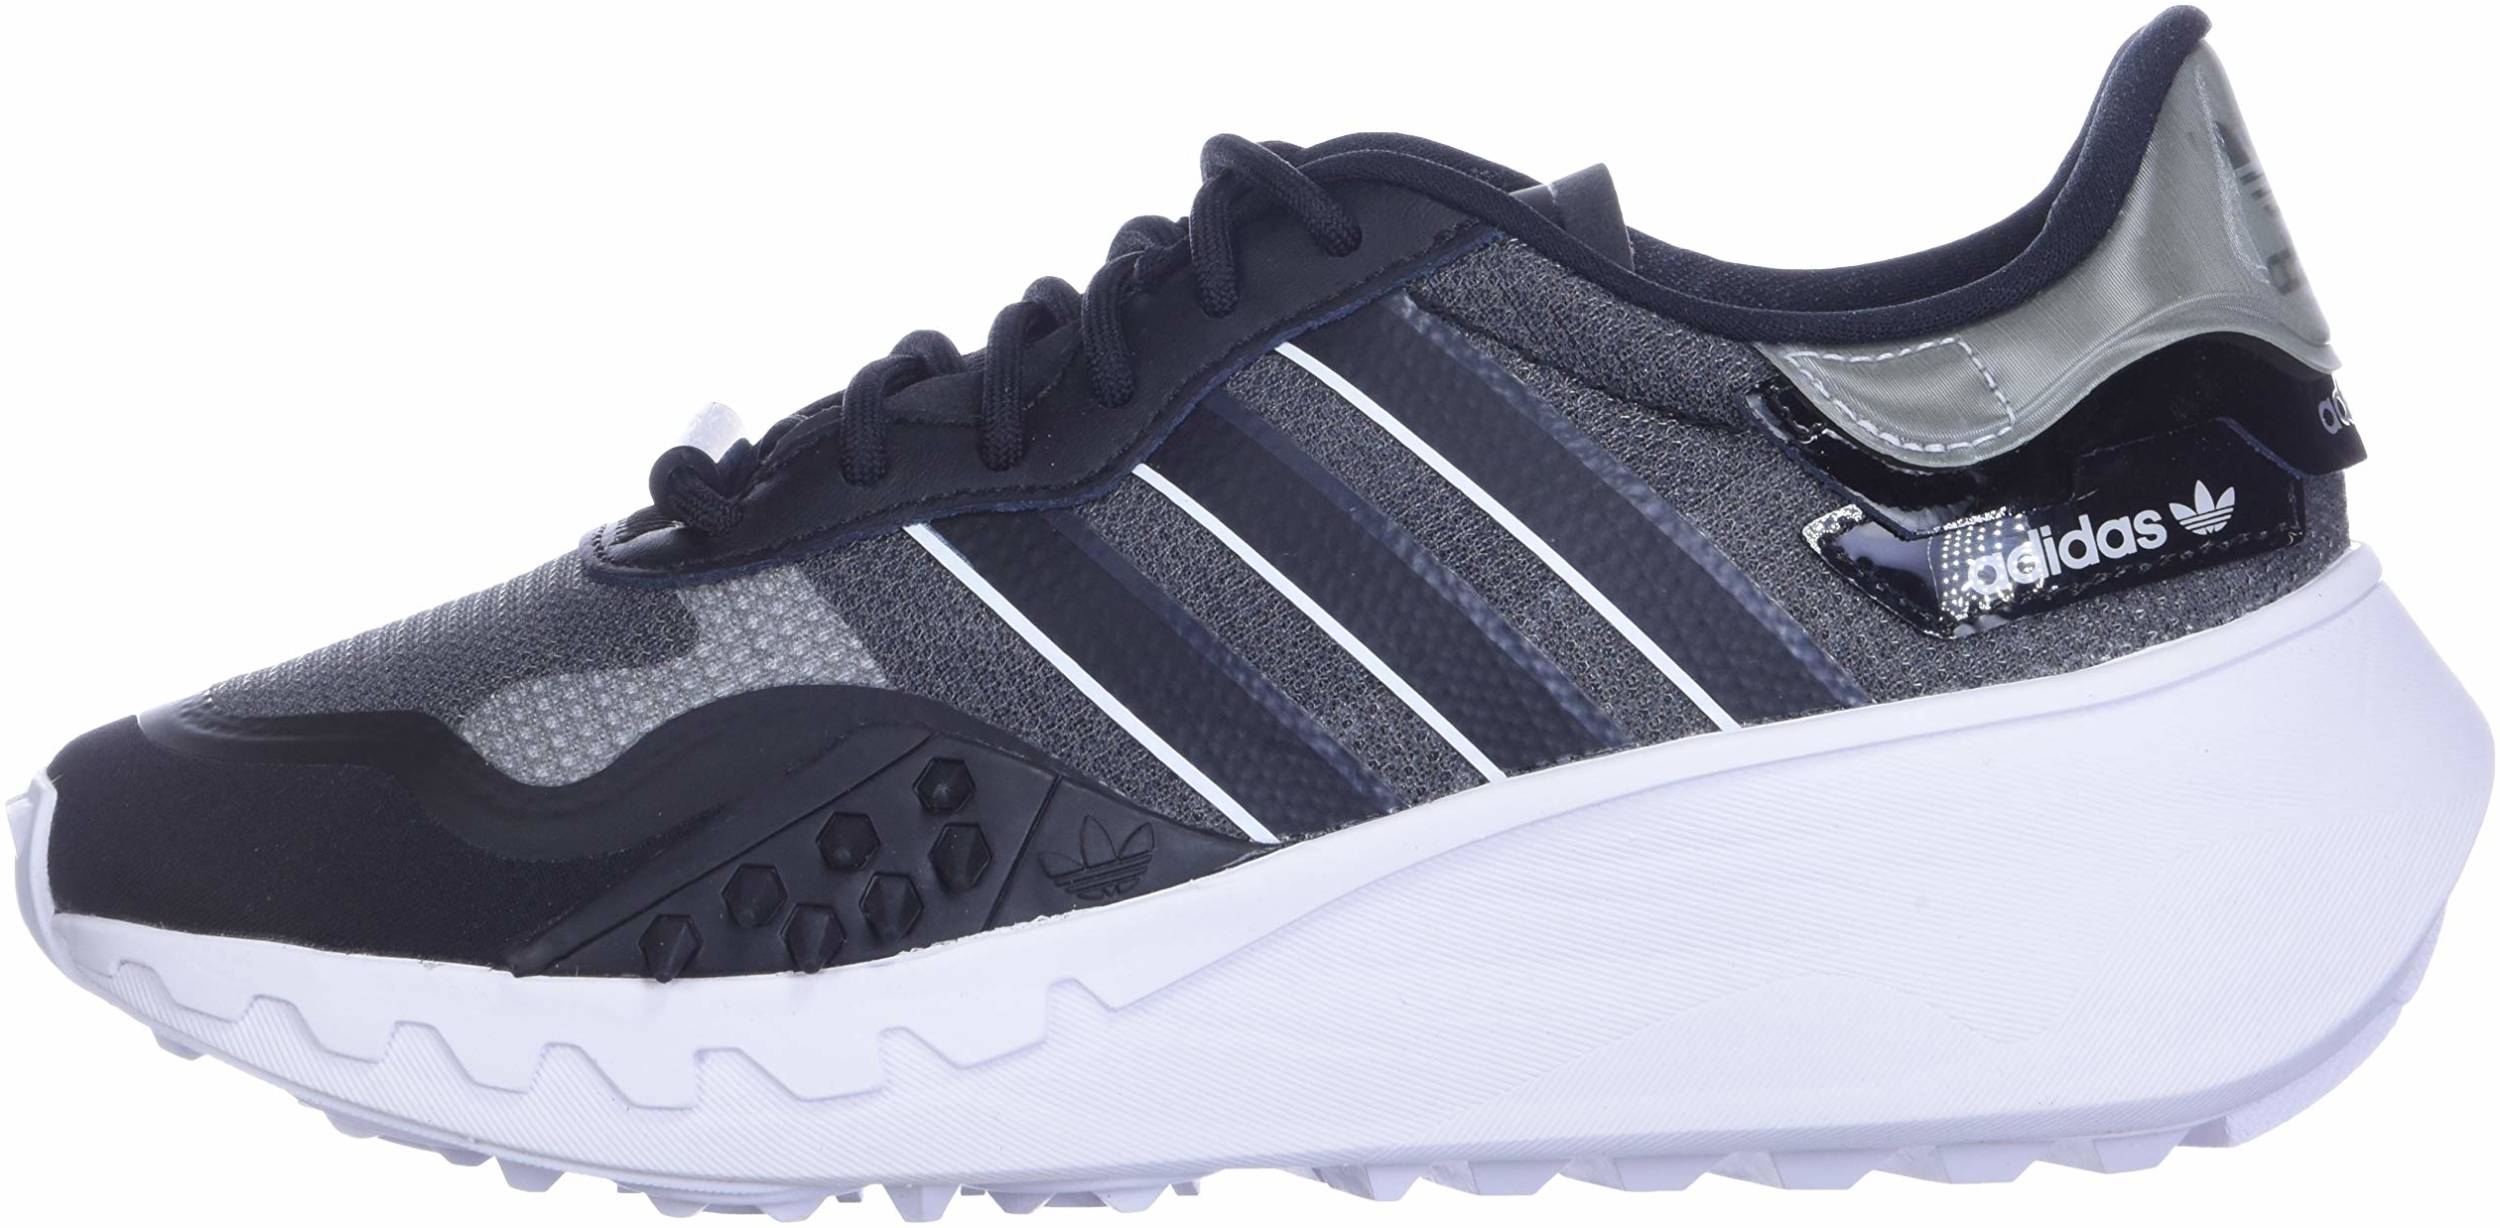 Adidas Choigo sneakers in 8 colors (only $60) | RunRepeat